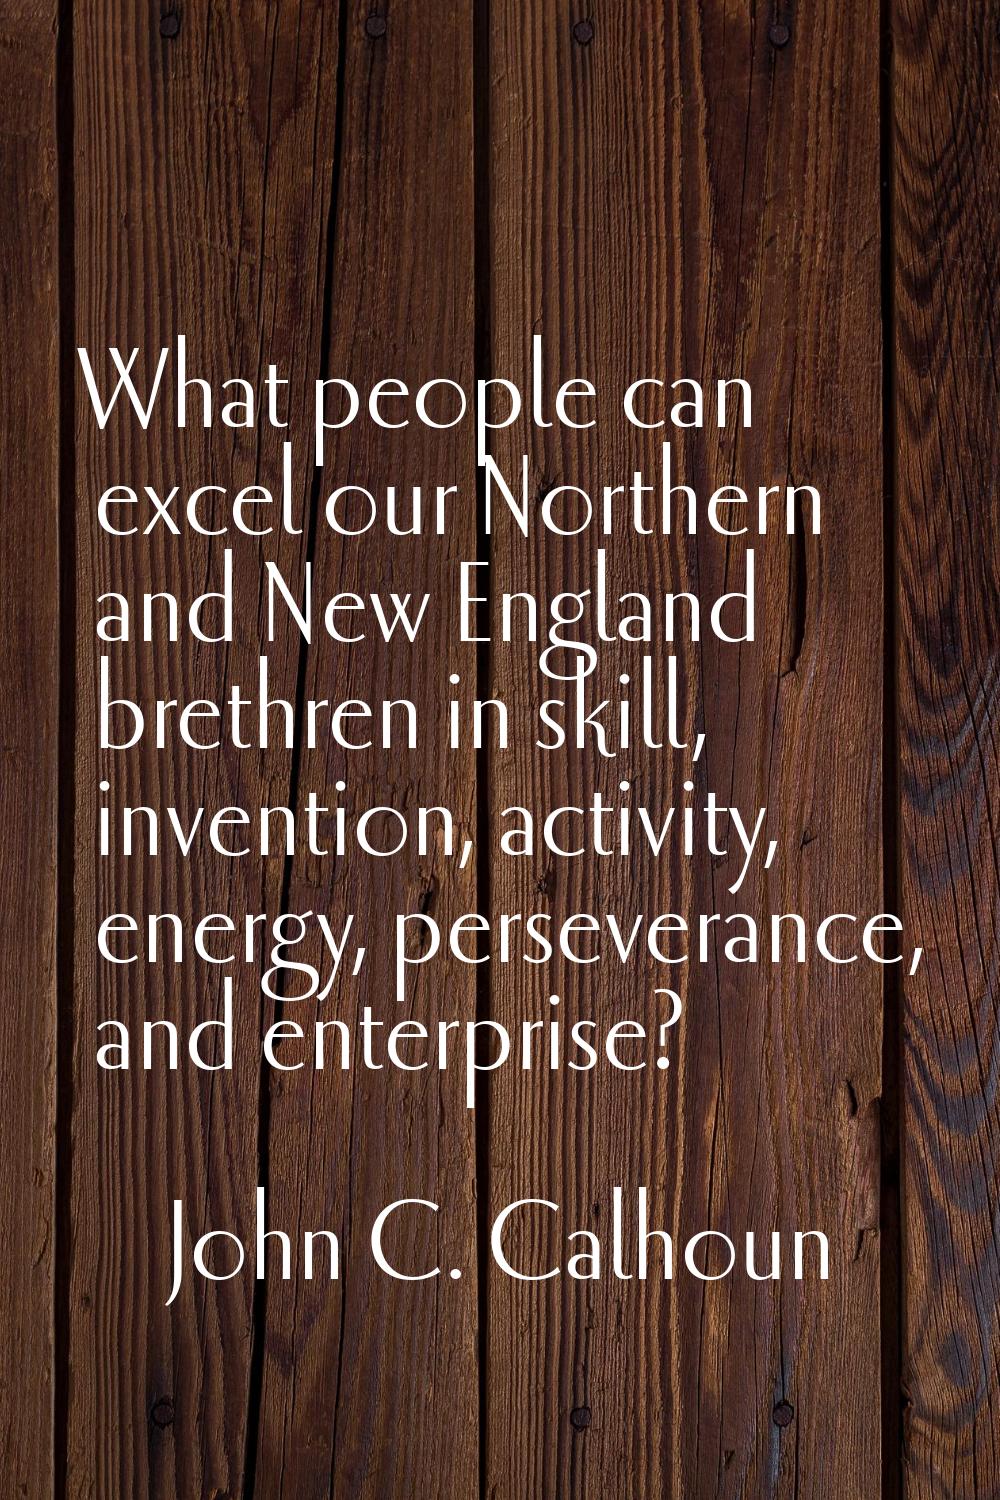 What people can excel our Northern and New England brethren in skill, invention, activity, energy, 